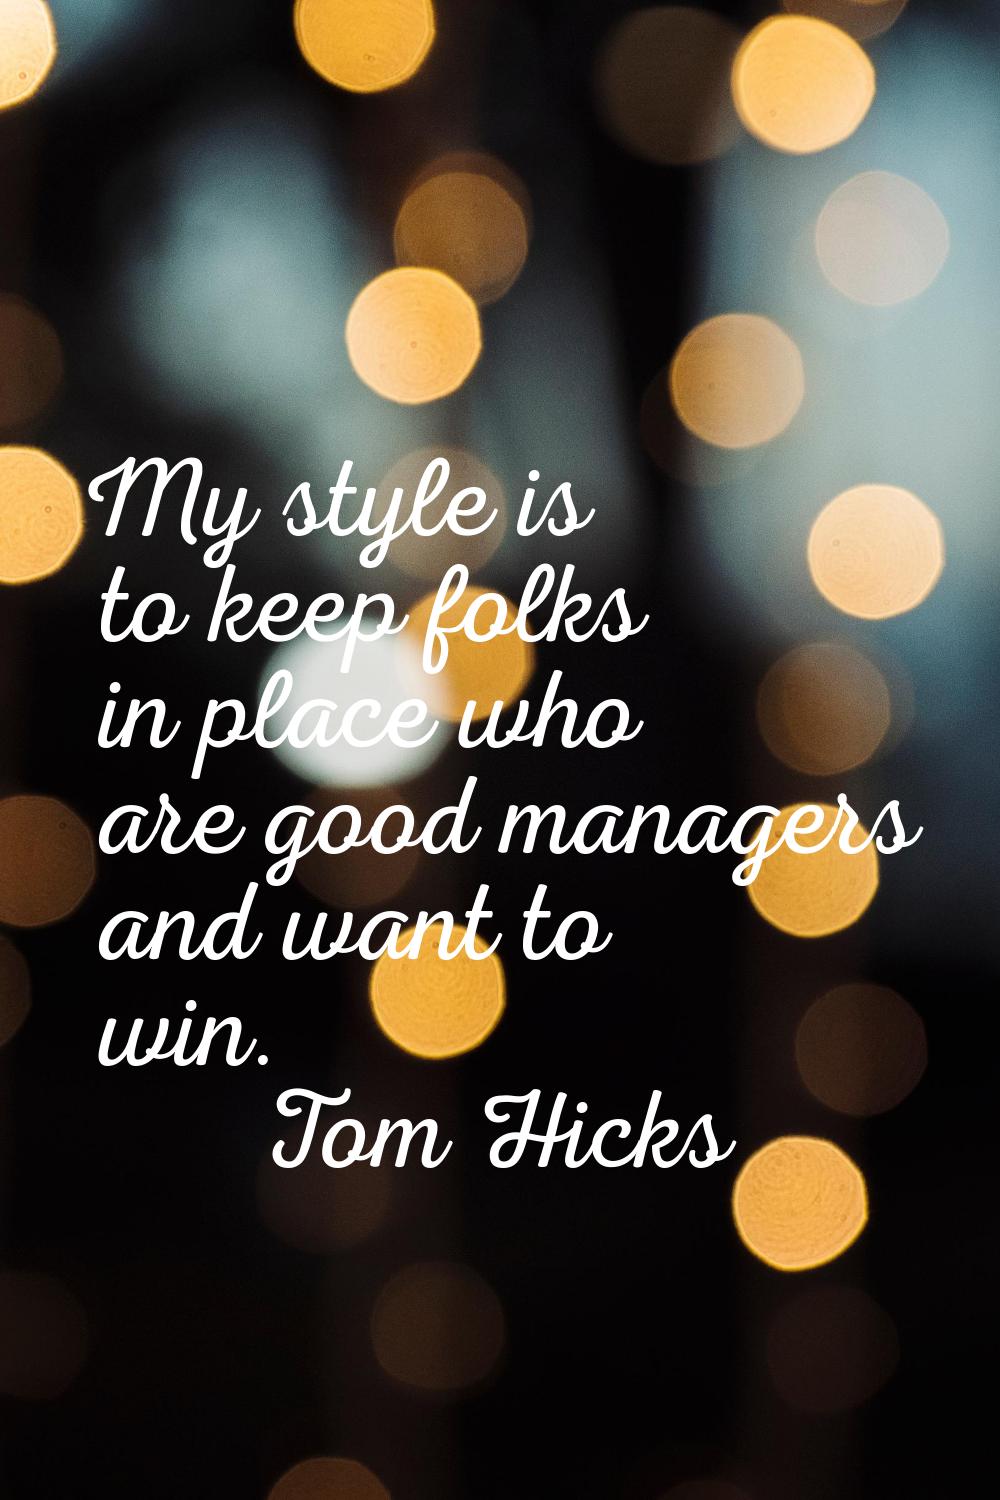 My style is to keep folks in place who are good managers and want to win.